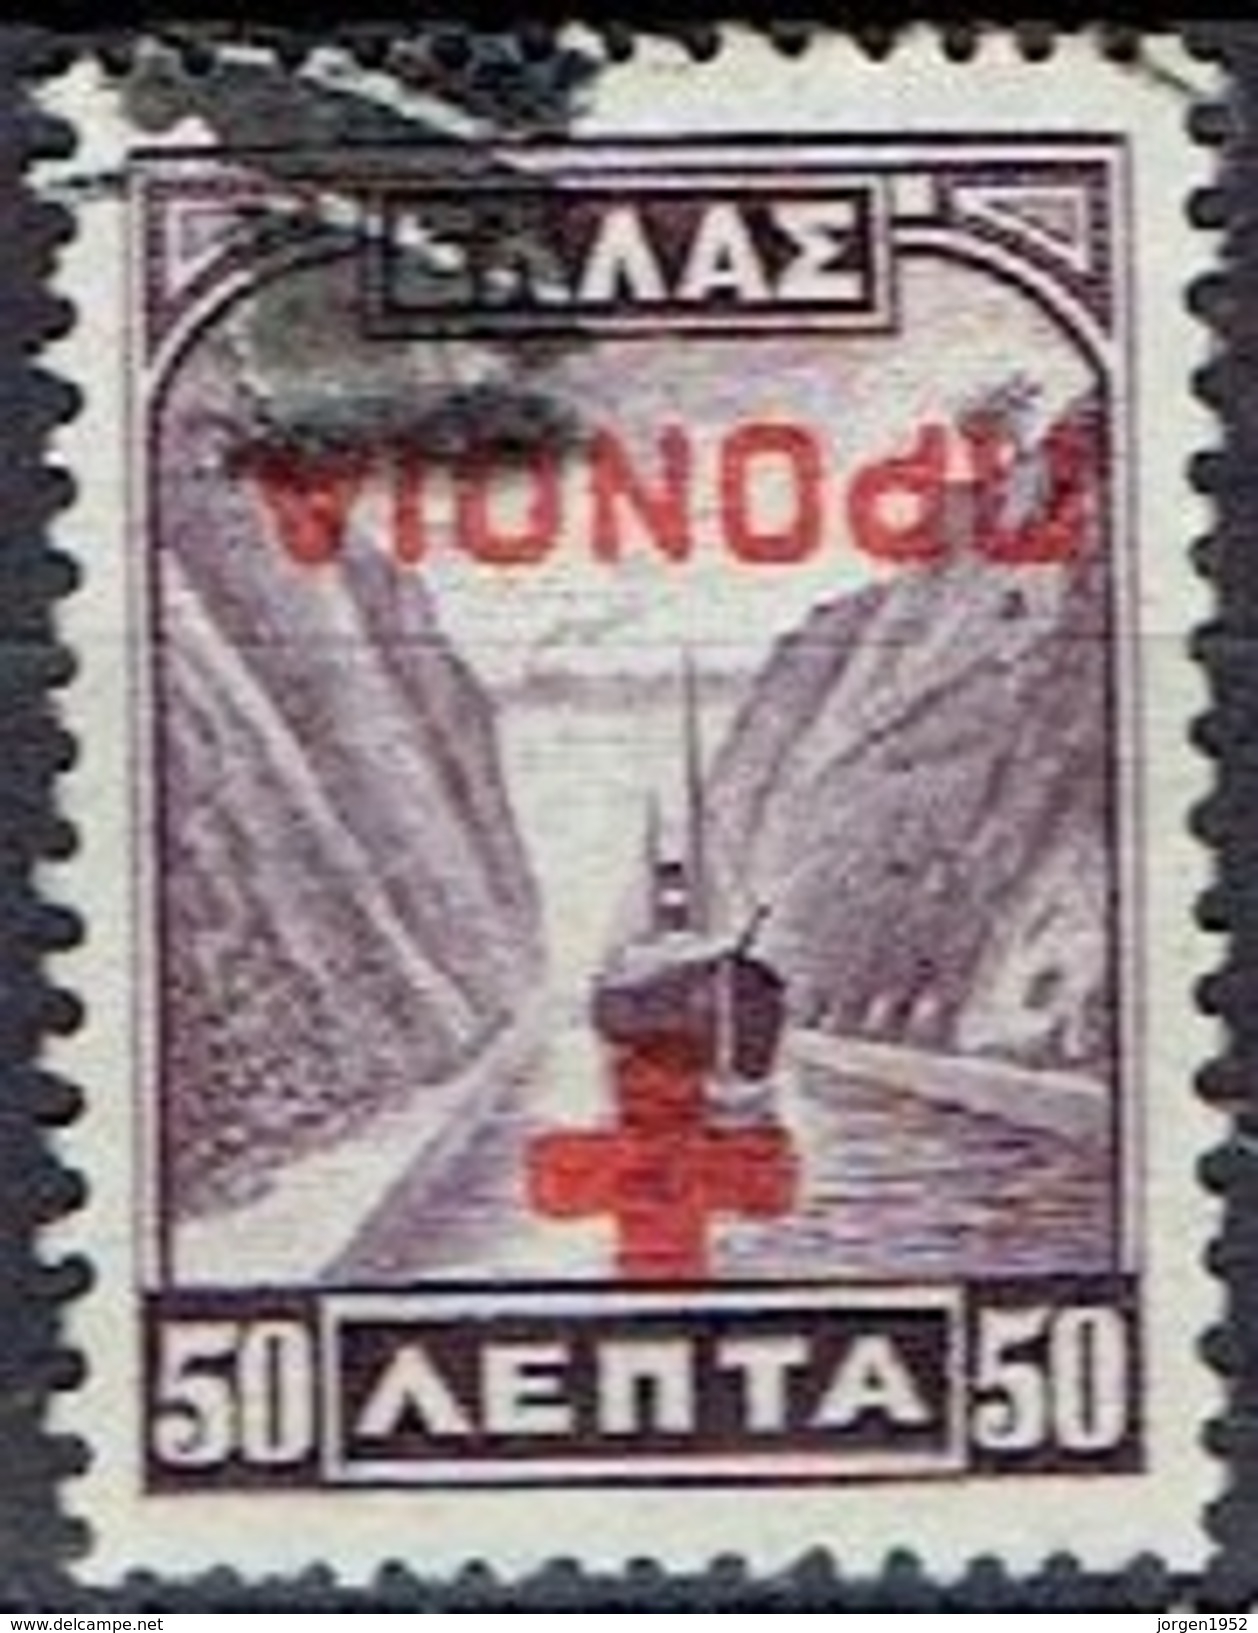 GREECE # SOCIAL WELFARE STAMPS FROM 1938 - Resistenza Nazionale